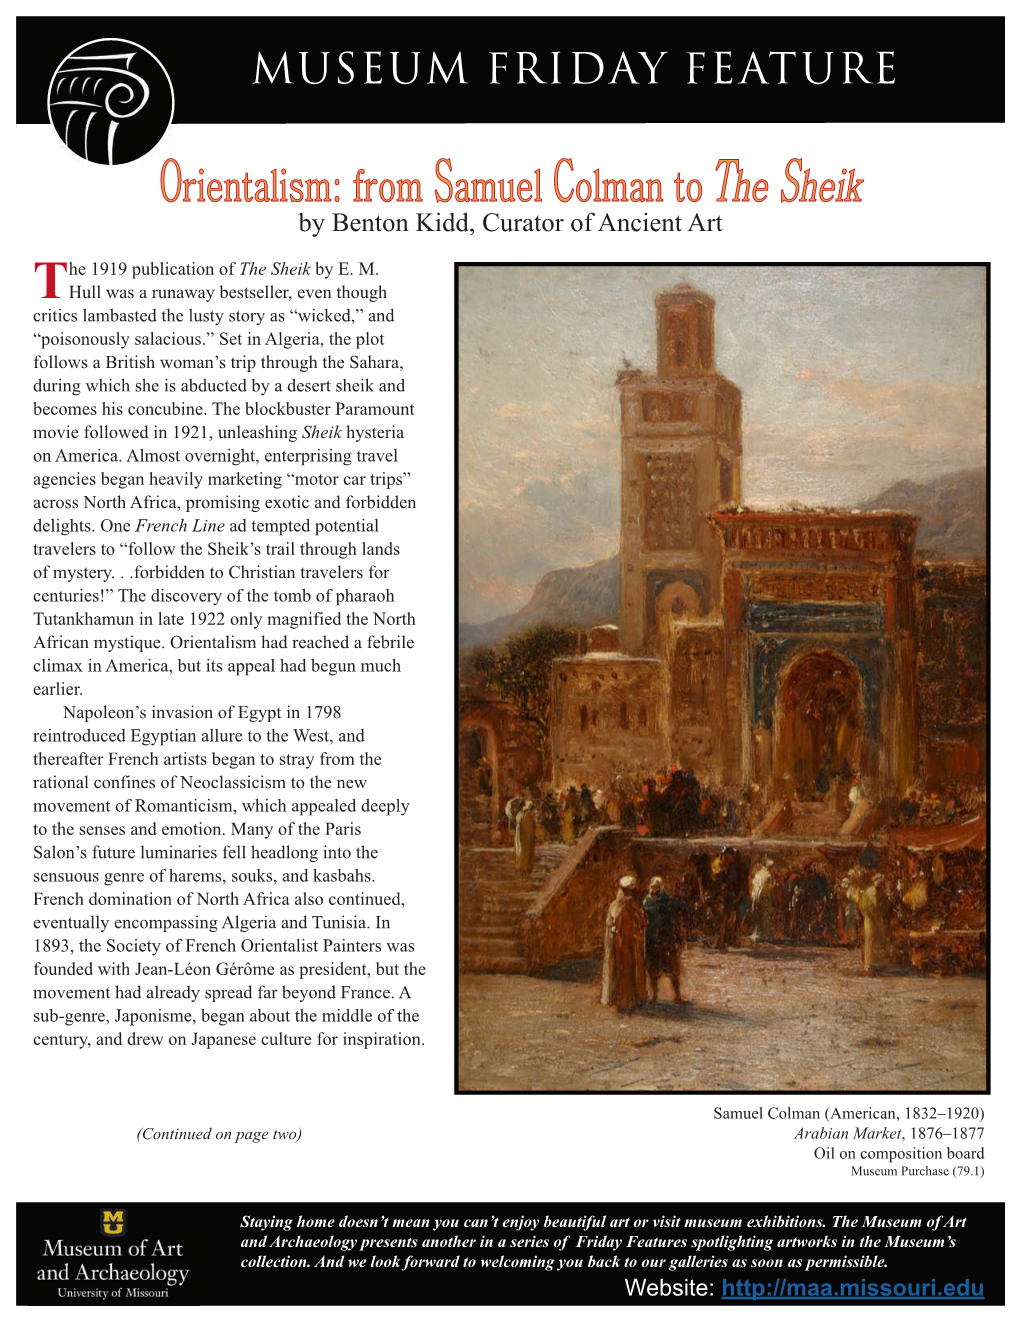 Orientalism: from Samuel Colman to the Sheik Article